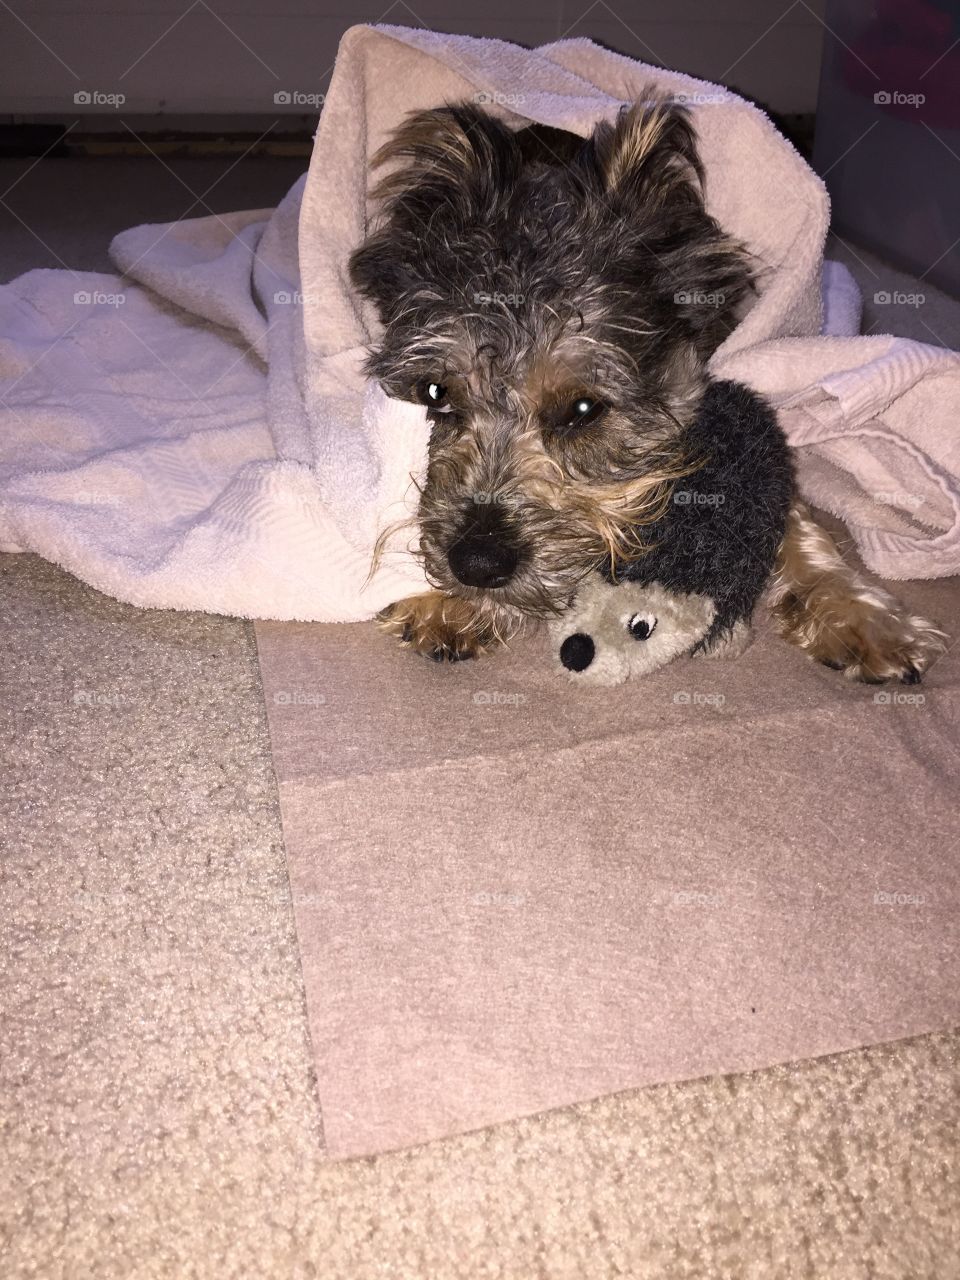 Snuggling with my toy drying off after a bath